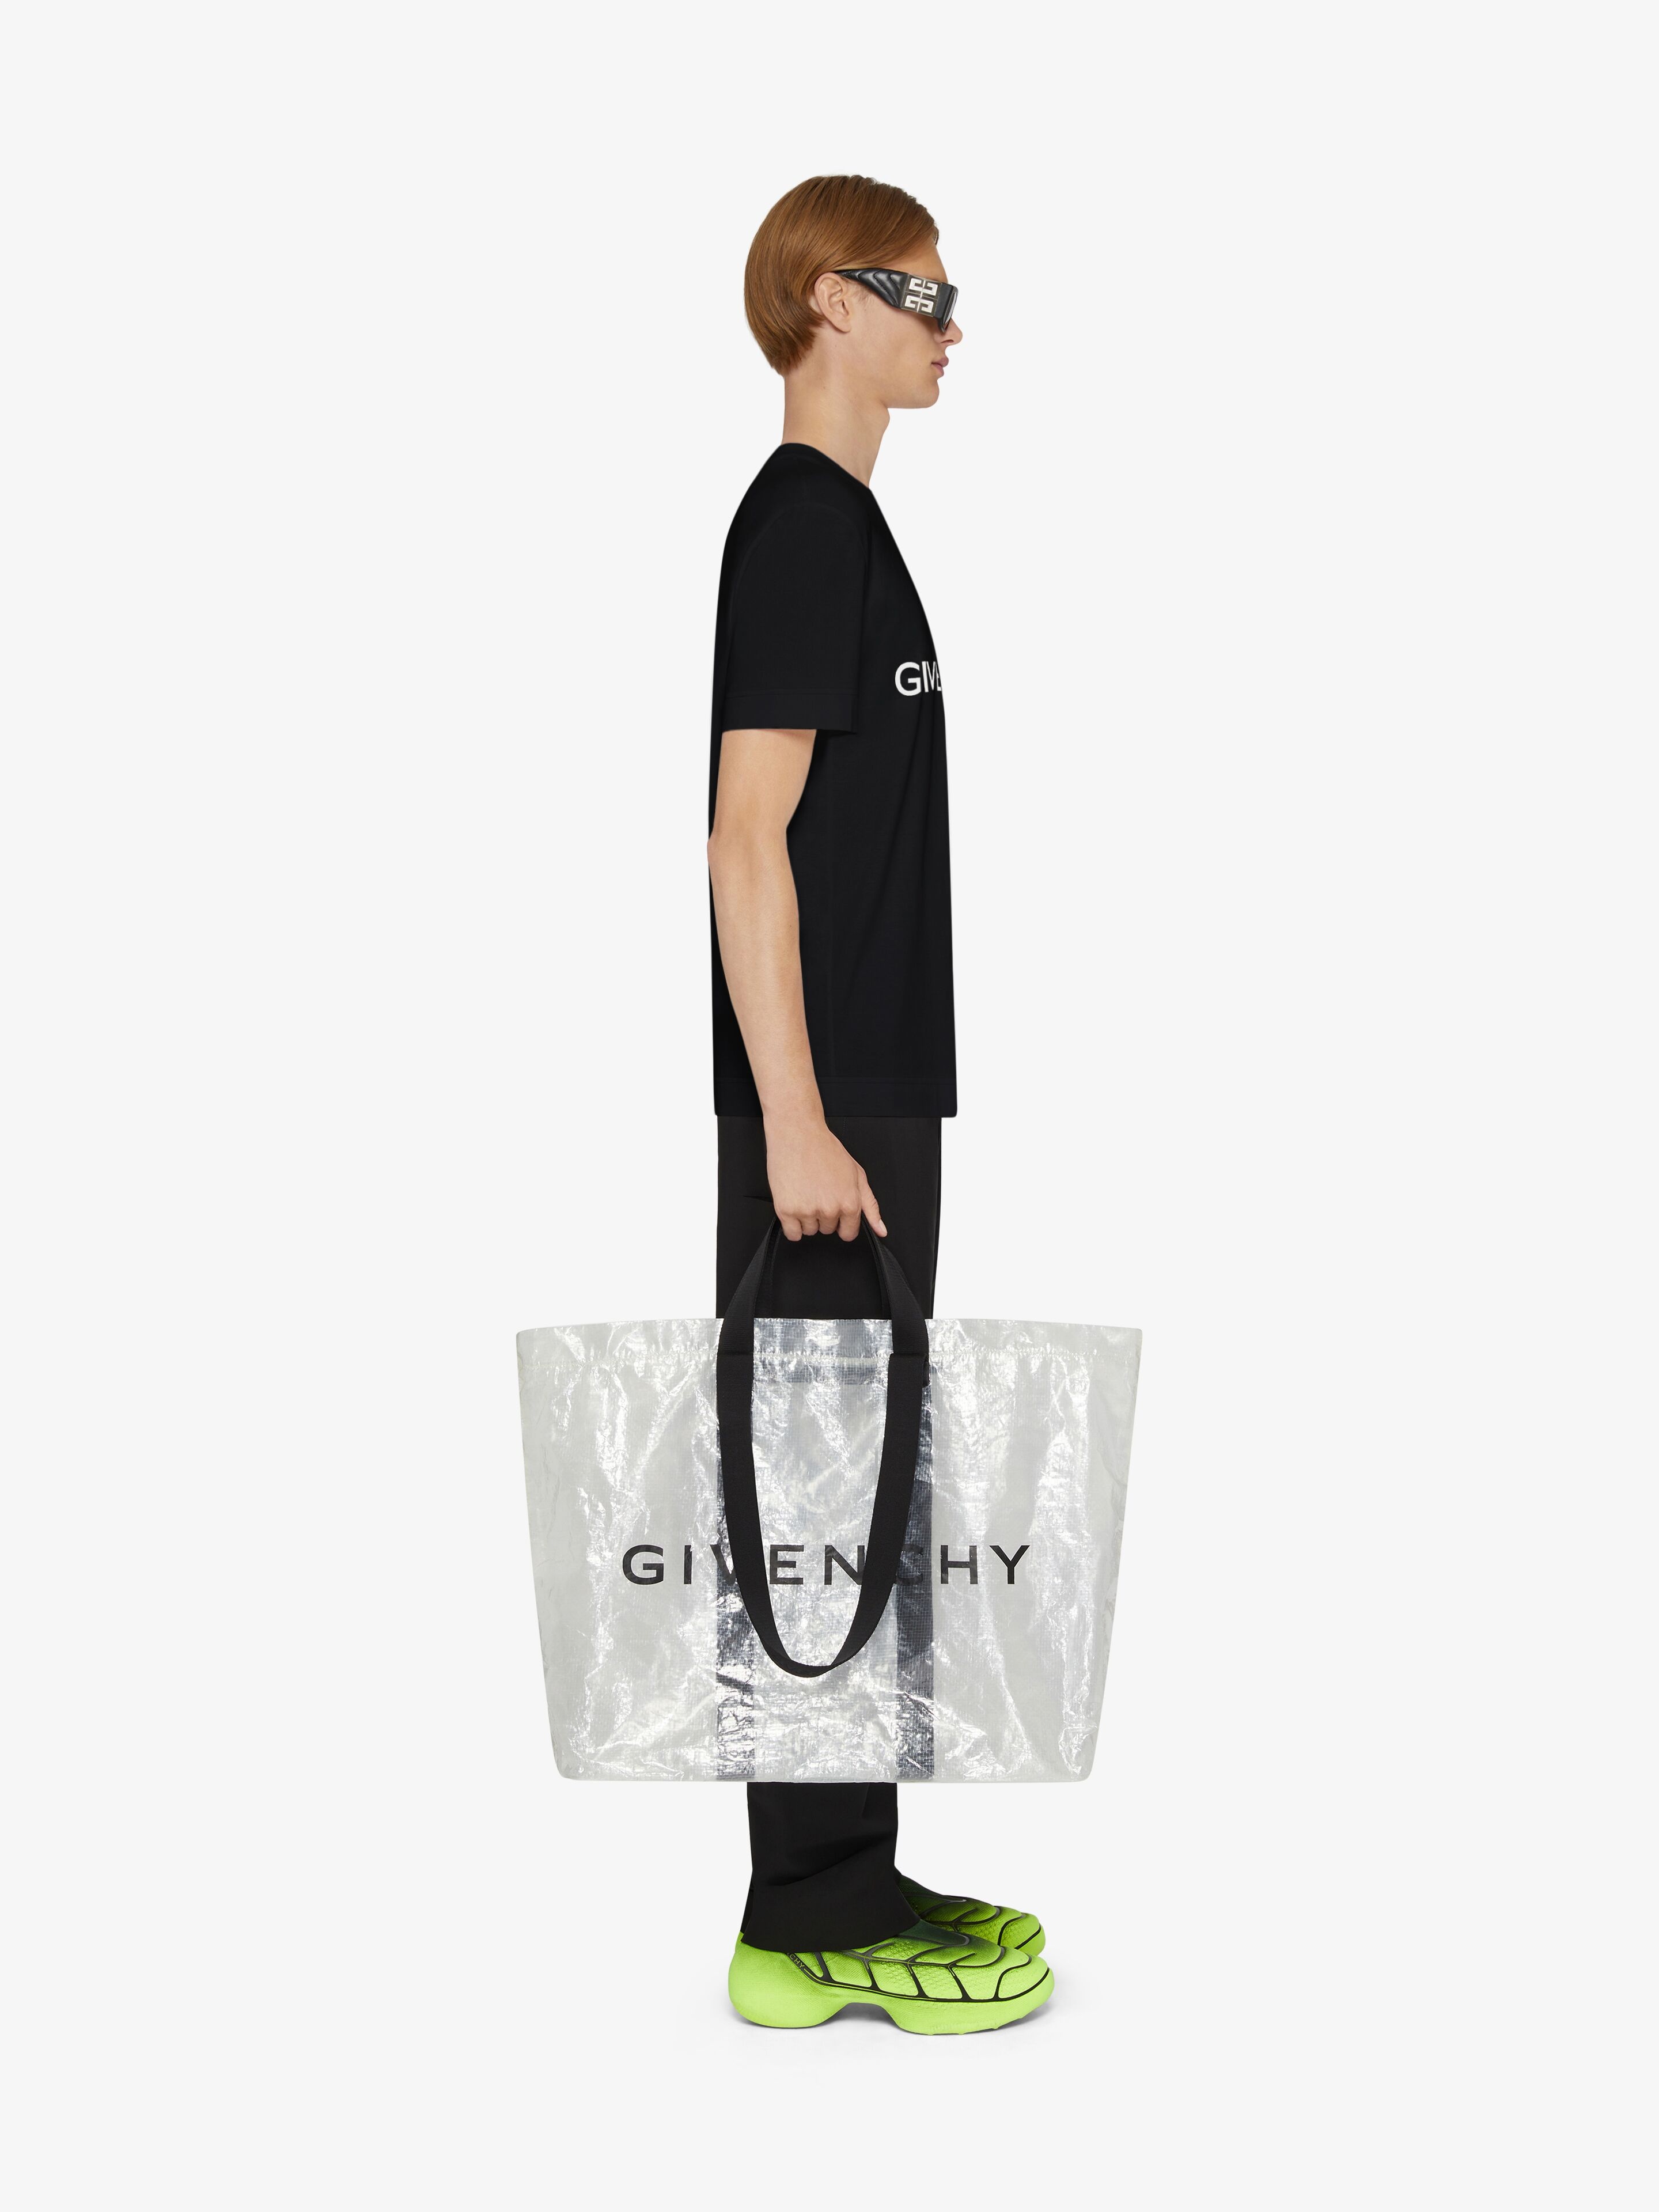 GIVENCHY ARCHETYPE SLIM FIT T-SHIRT IN COTTON - 3